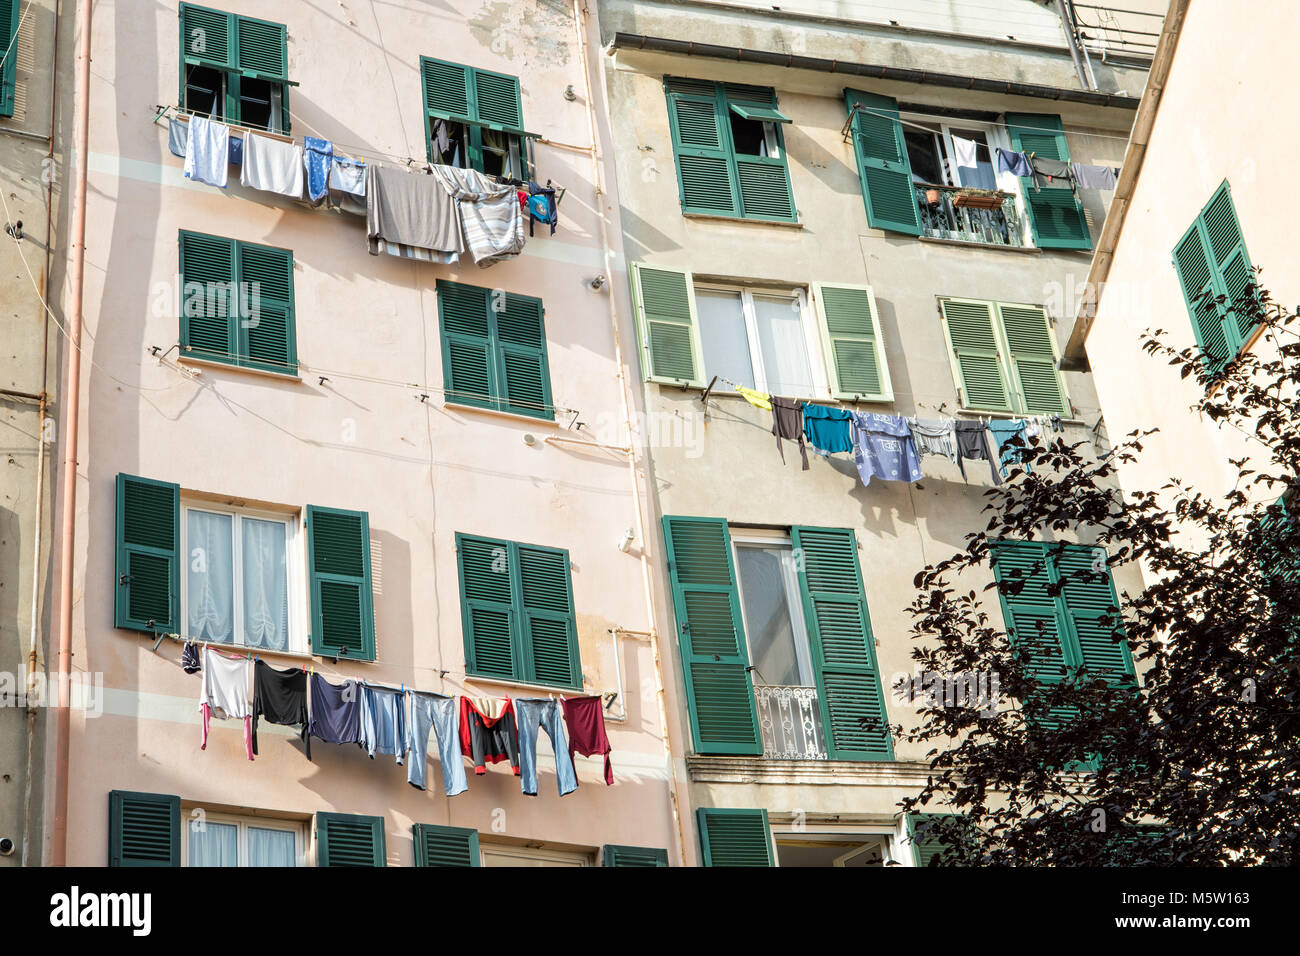 Laundry drying at the windows in the historical center of Genoa, Liguria, Italy Stock Photo